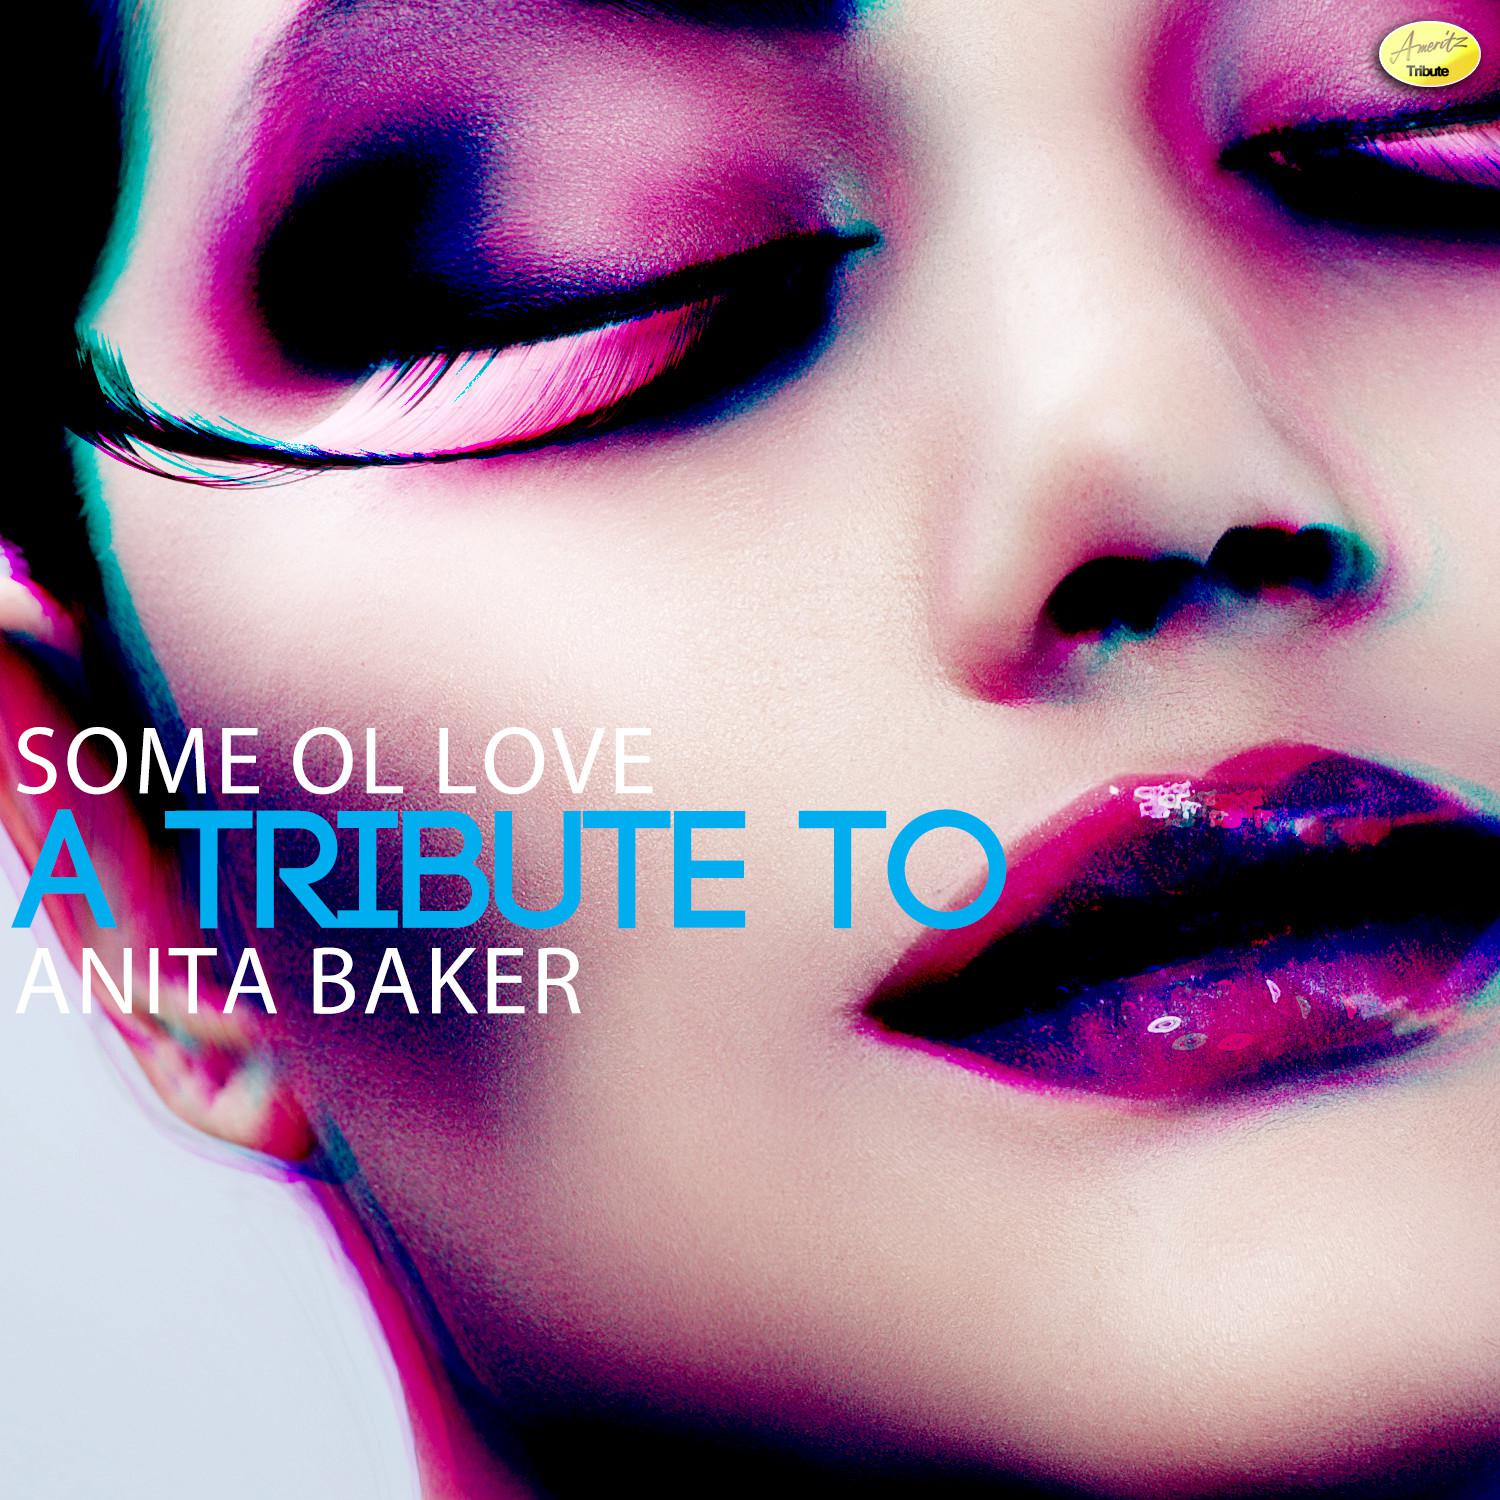 Some Ol' Love - A Tribute to Anita Baker